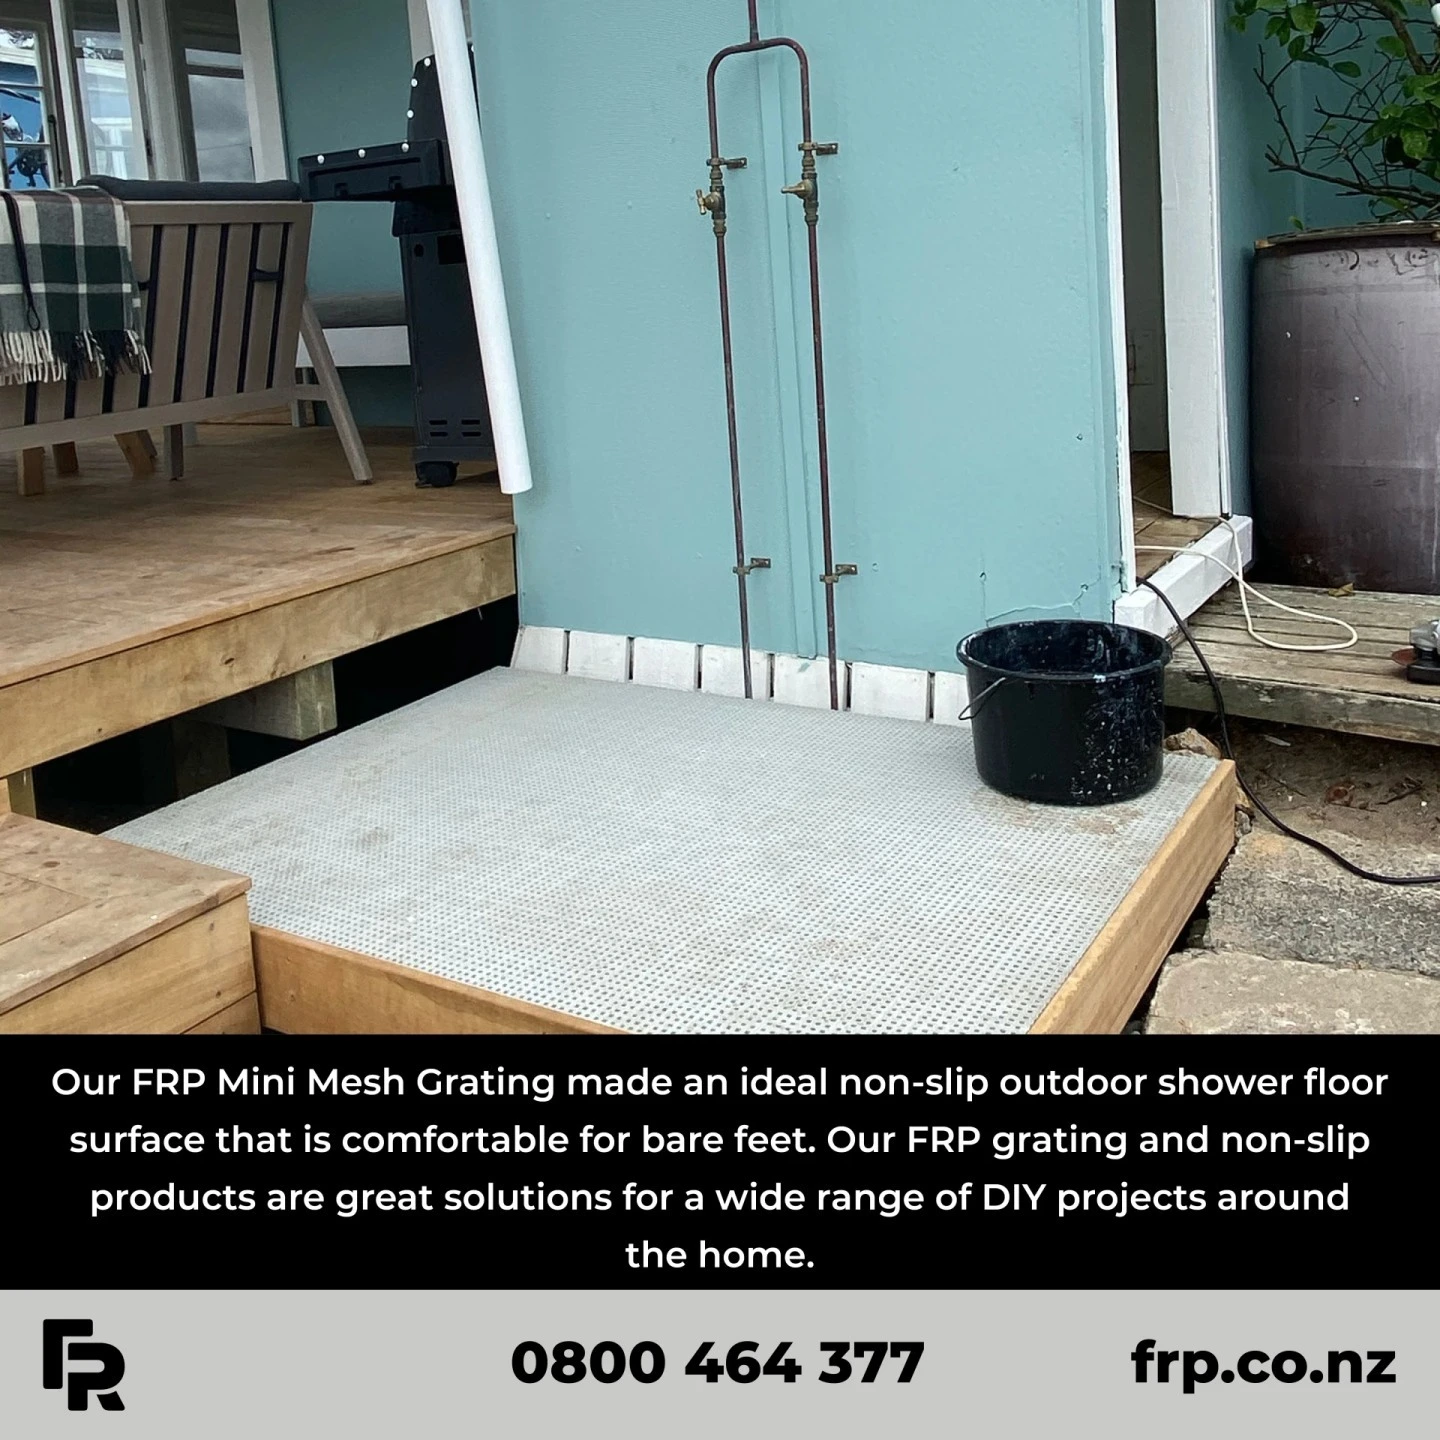 Get summer-ready with FRP!

#frp #frpproducts #residential #diyprojects #outdoorliving #diy #flooring #non-slip